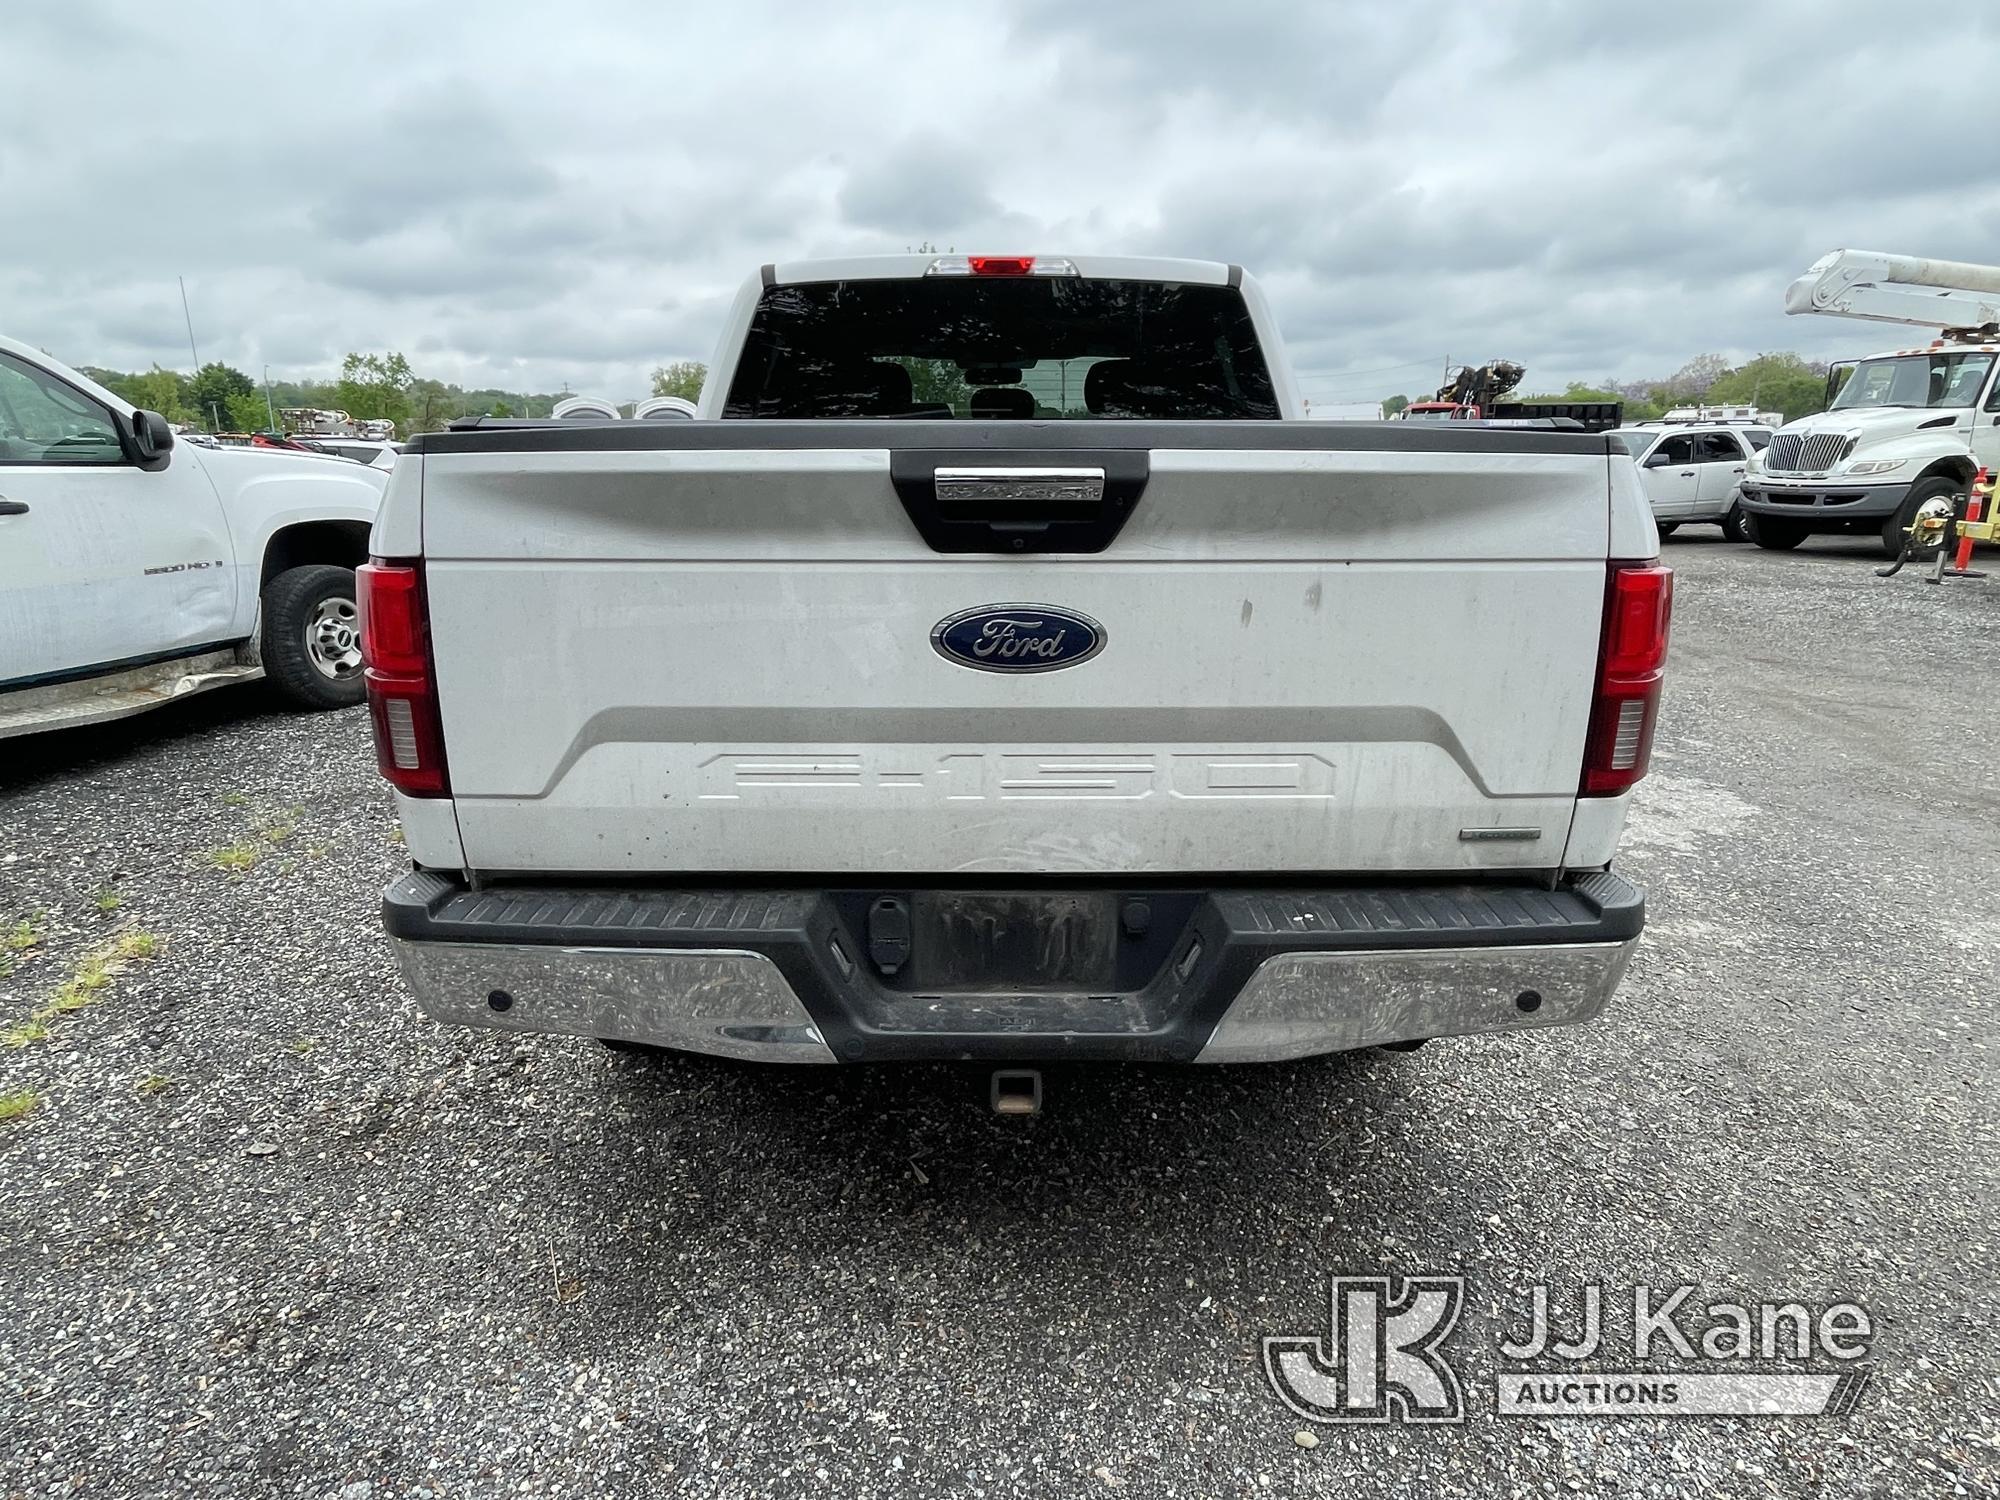 (Plymouth Meeting, PA) 2018 Ford F150 4x4 Crew-Cab Pickup Truck Bad Engine,Runs & Moves, Abs Light O